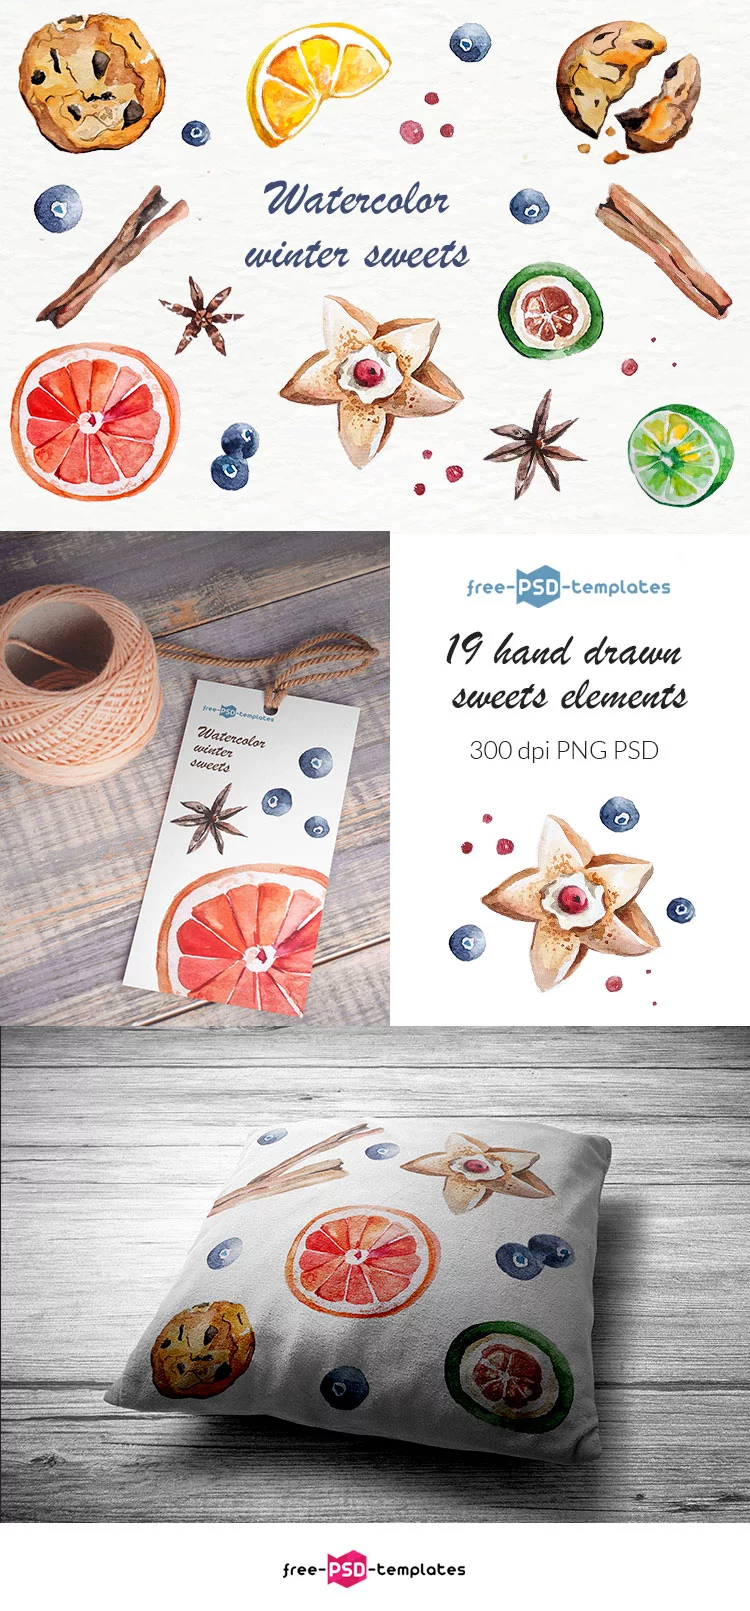 Free Watercolor Winter Sweets Collection